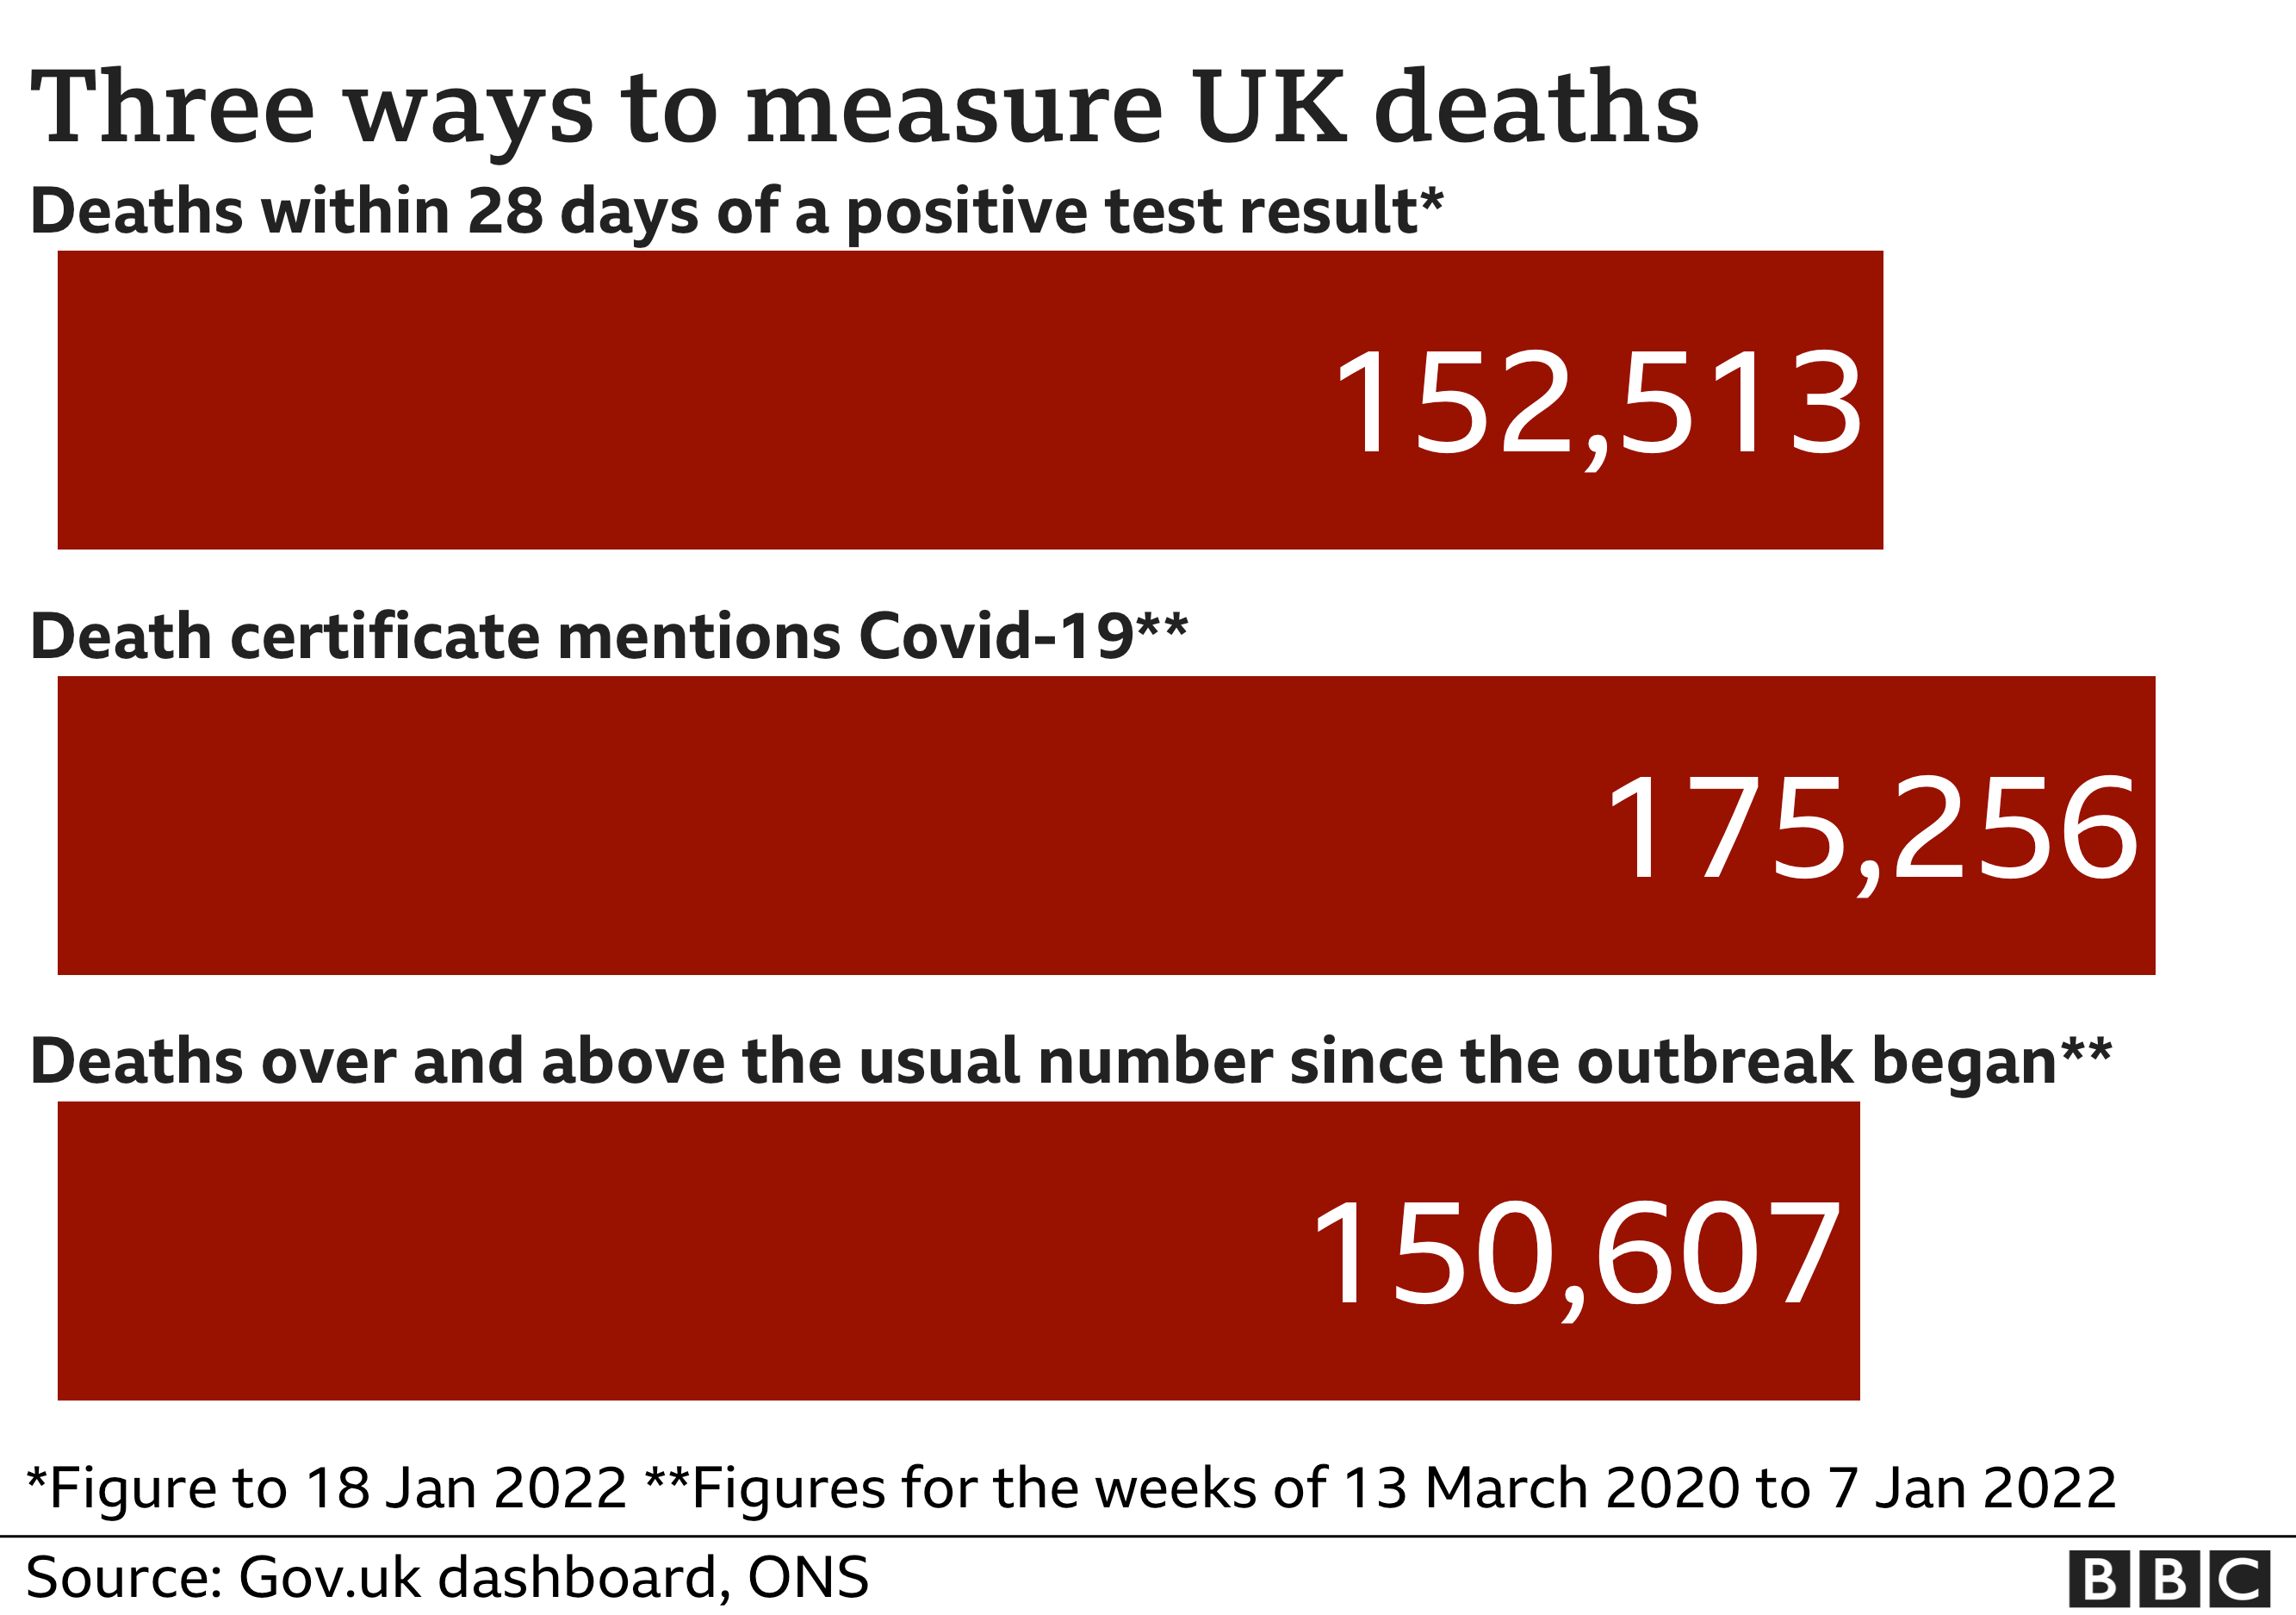 Chart showing the three ways of measuring deaths from Covid - the government figure of 152,513 includes all deaths within 28 days of a positive result; the ONS counts all death certificate mentions and that figure is now 175,256; the excess death figures is the number of deaths over and above the usual total and that figure is now 150,607